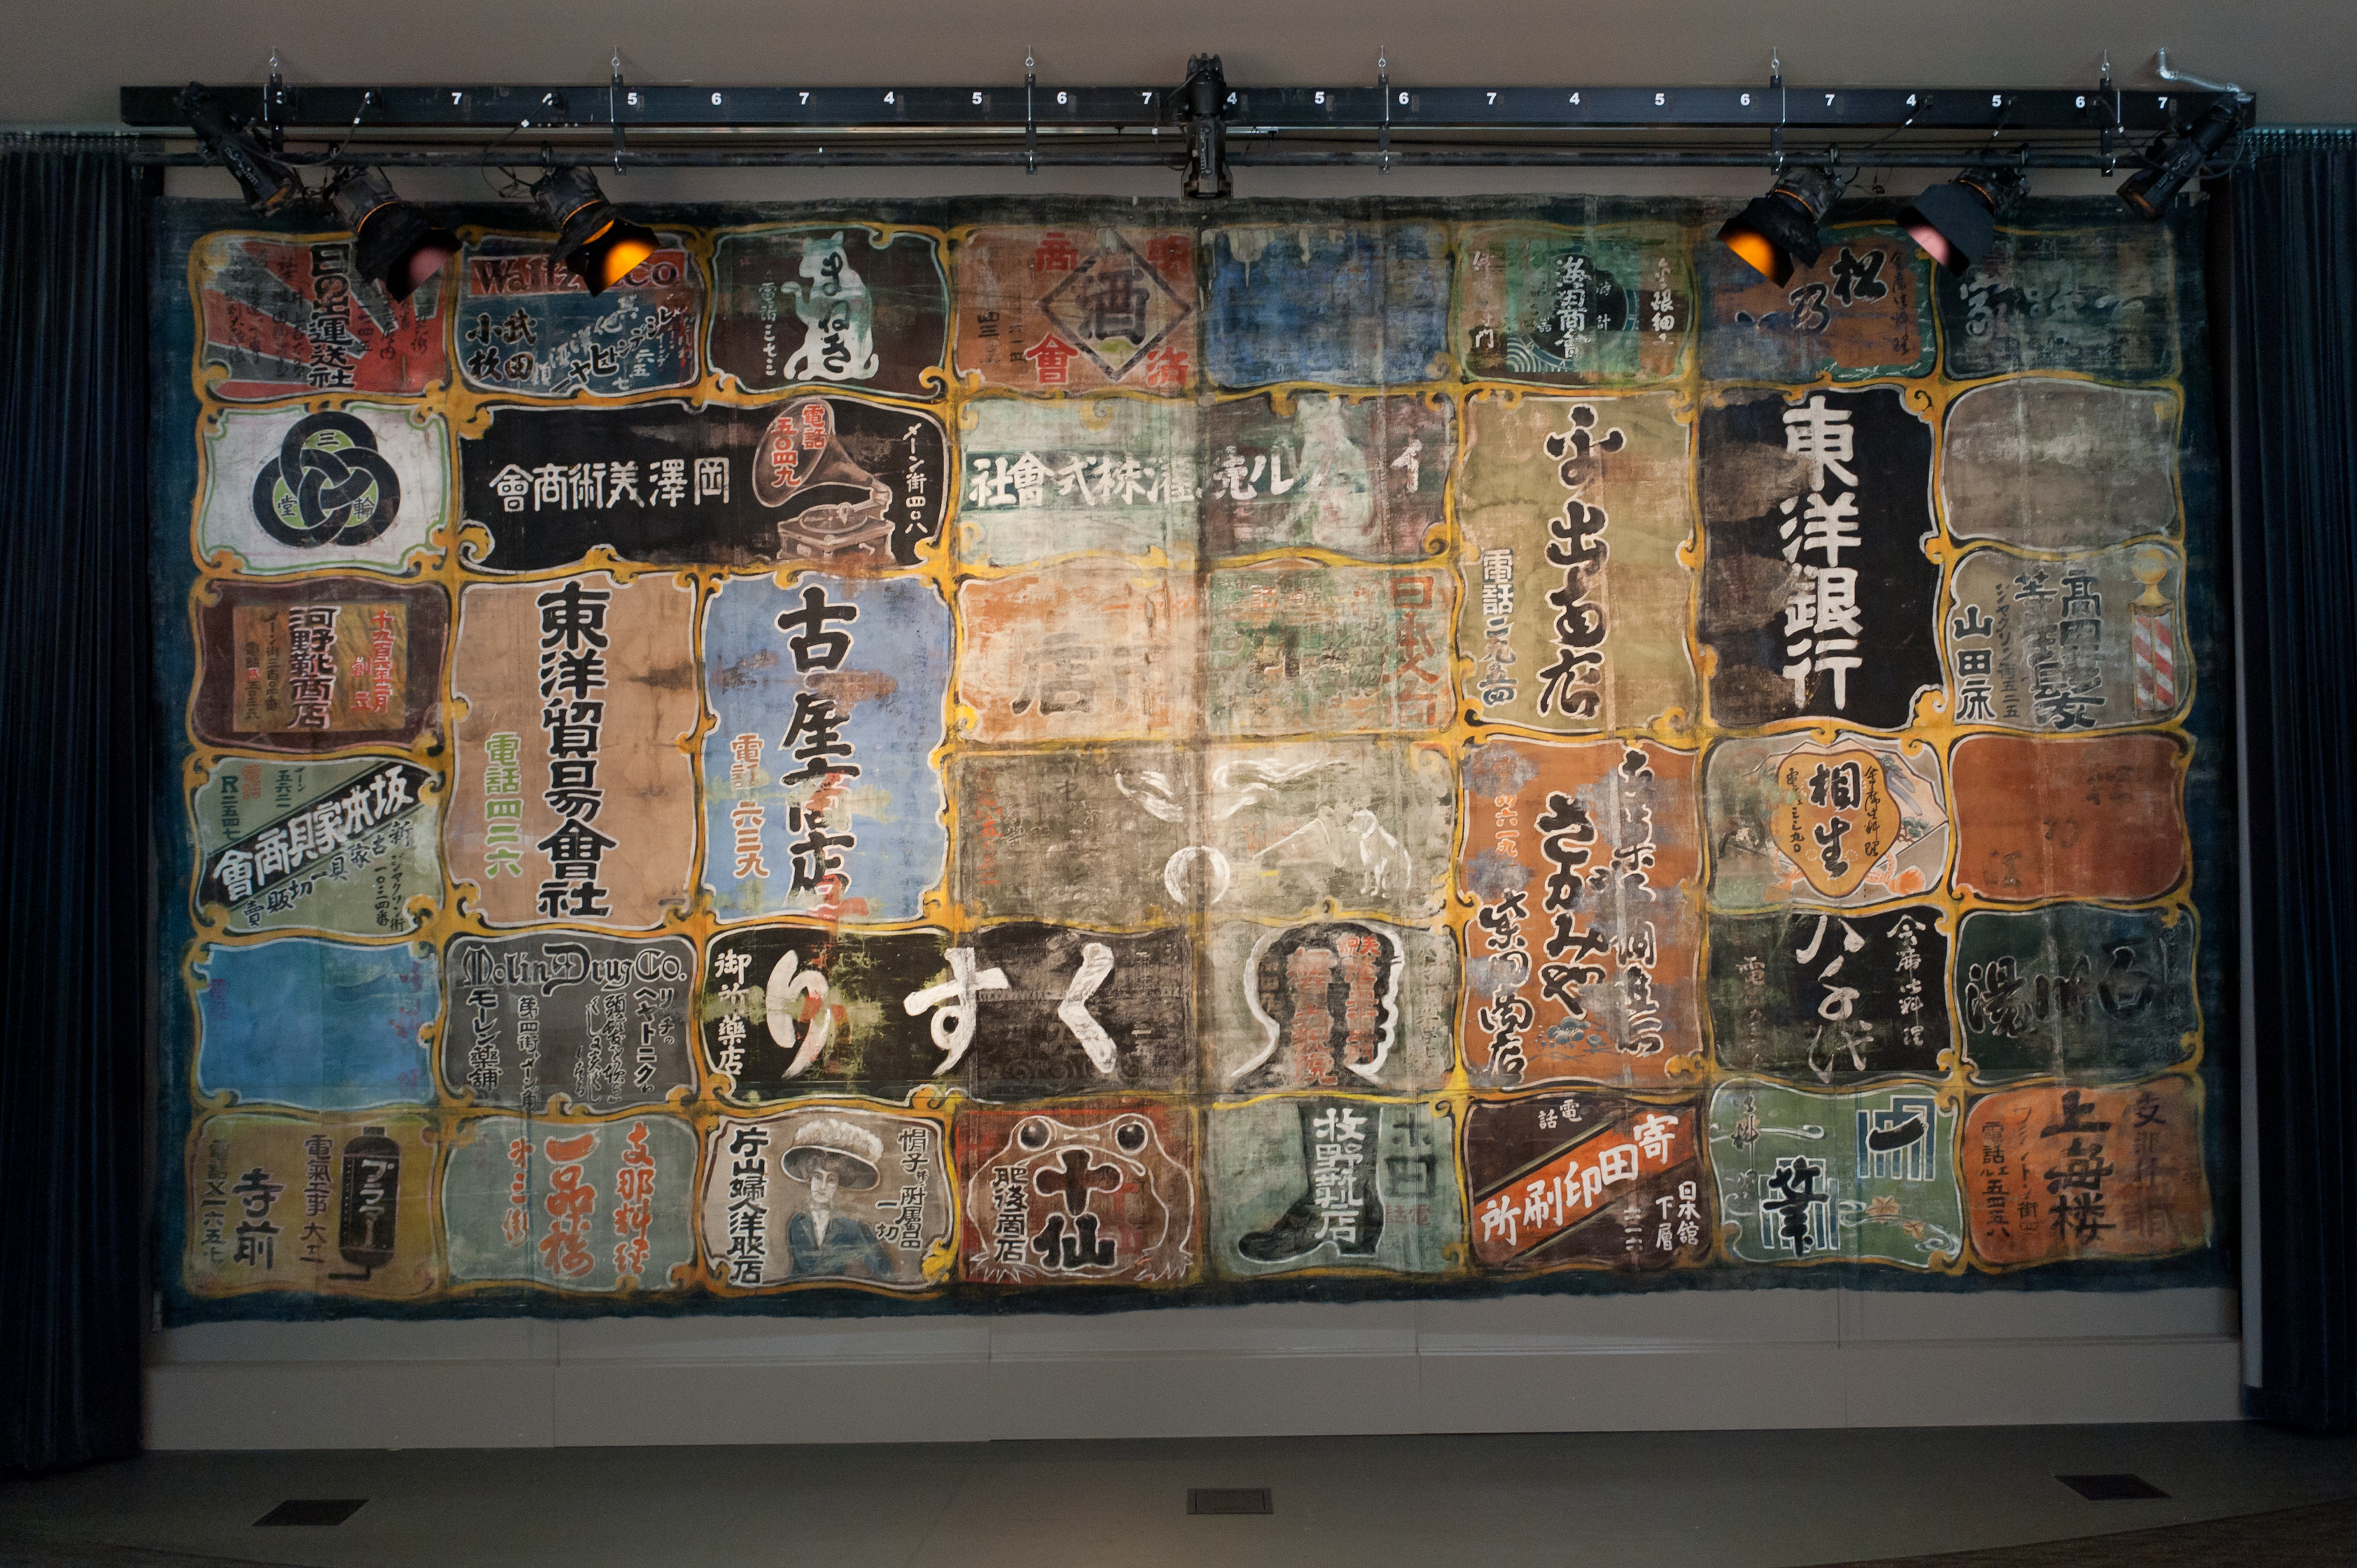 theatre curtain painted with Japanese characters advertising local businesses